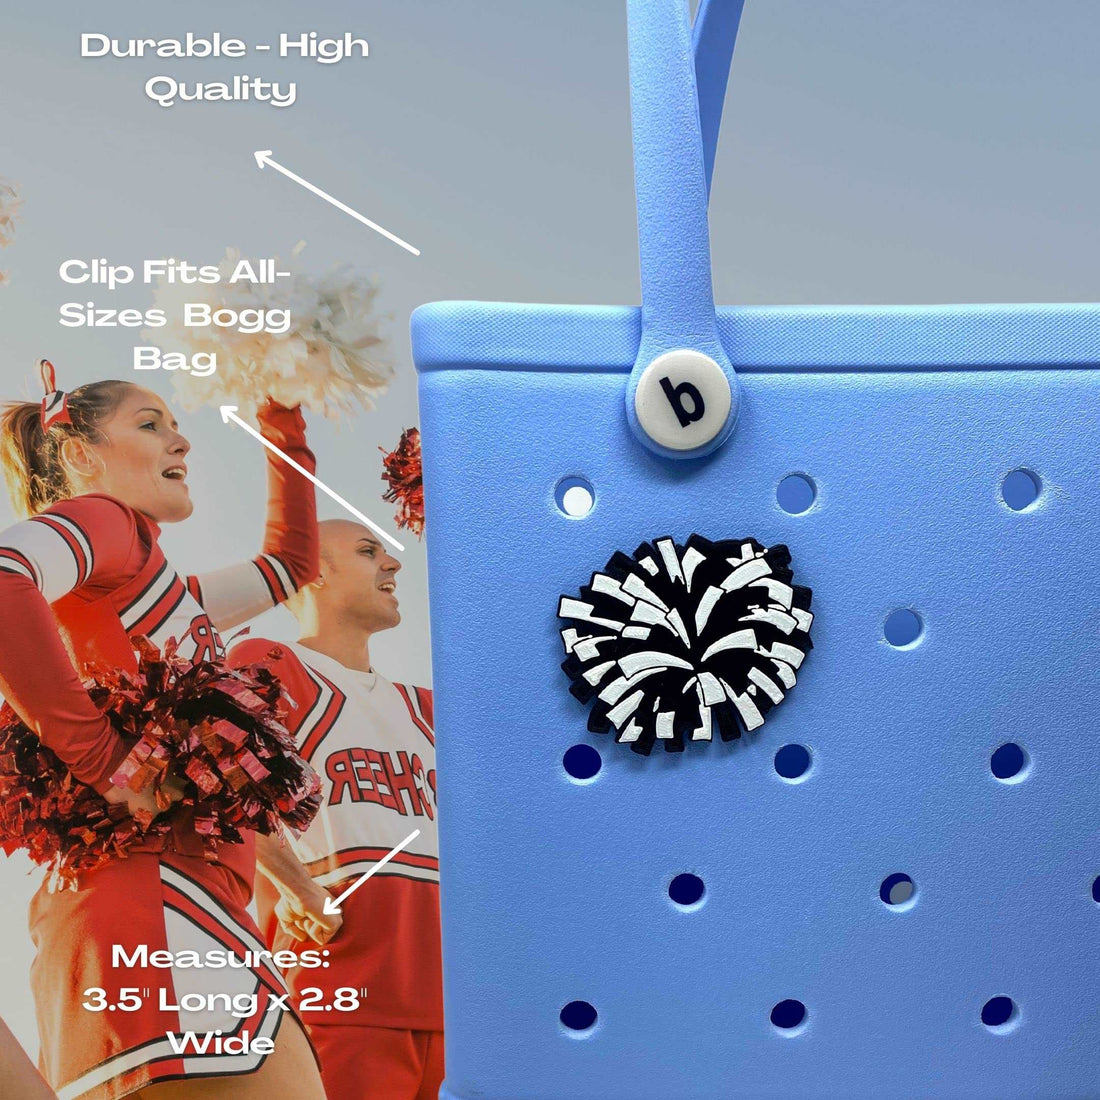 BOGLETS - Cheerleading Charm Compatible with Bogg Bags - Decorative Charm for Bogg Bags & Other Tote Bags Black Pom Pom